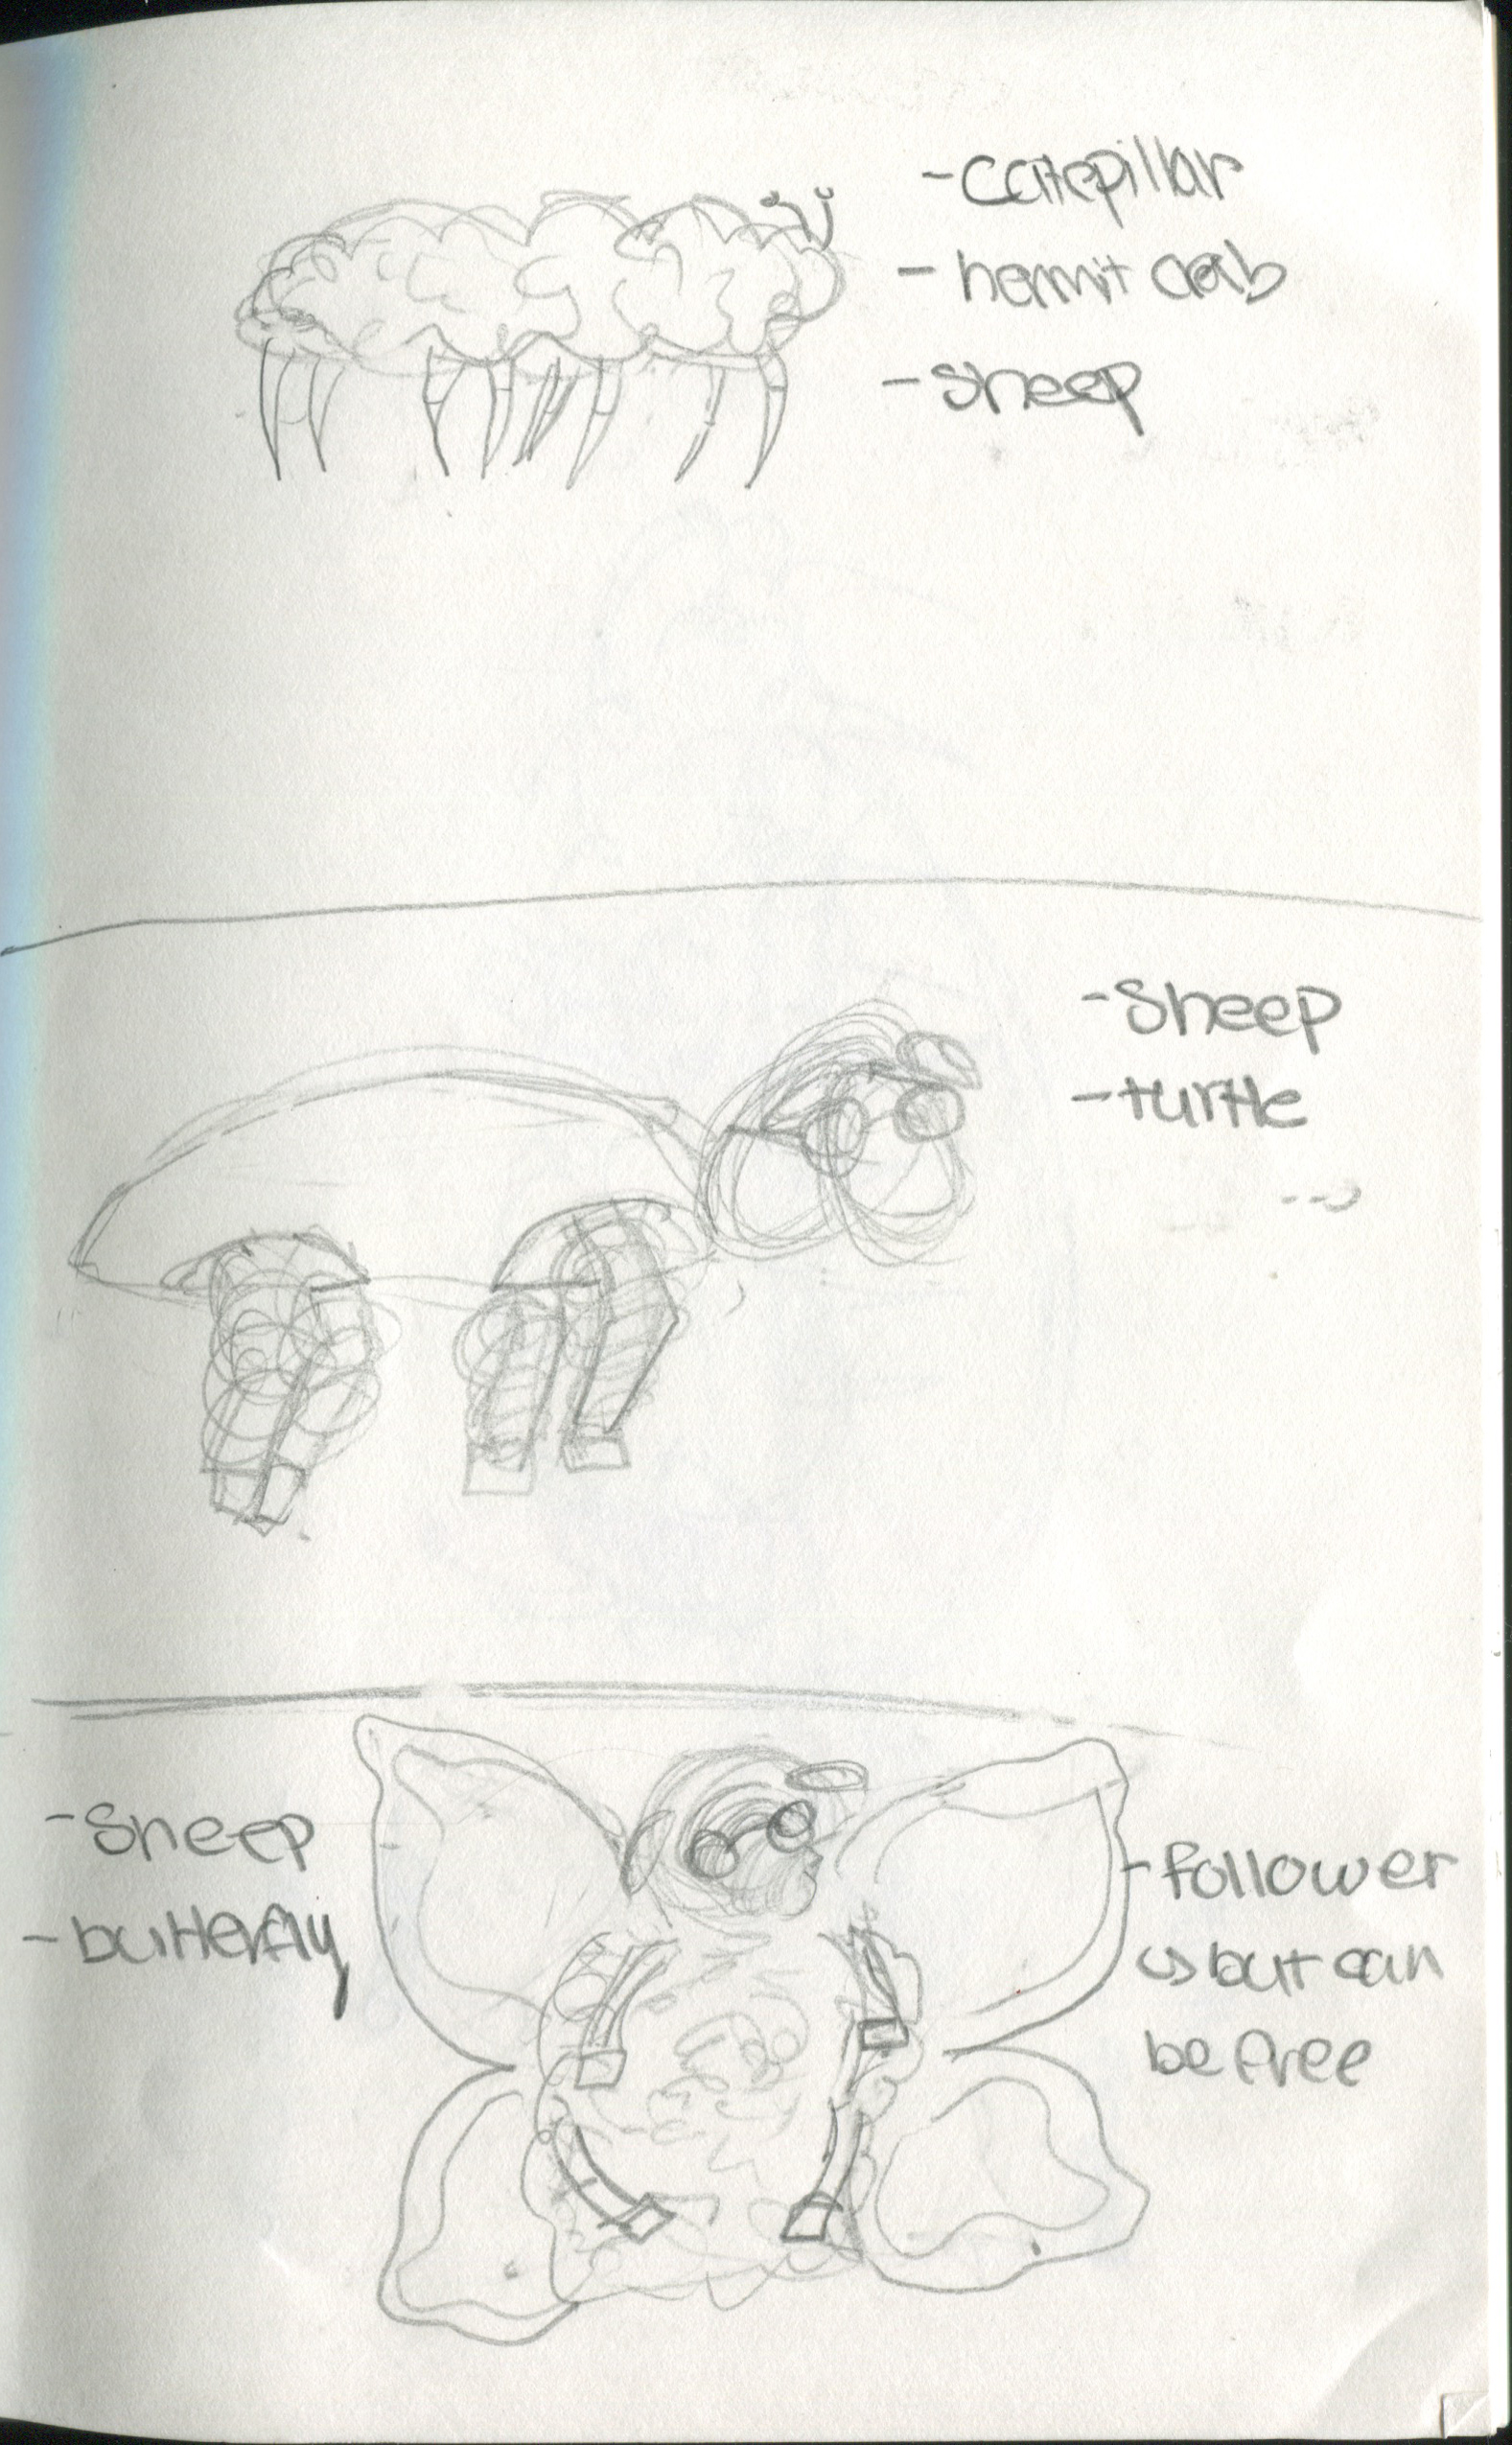 This is a picture of my initial brainstorm sketches of my animal character